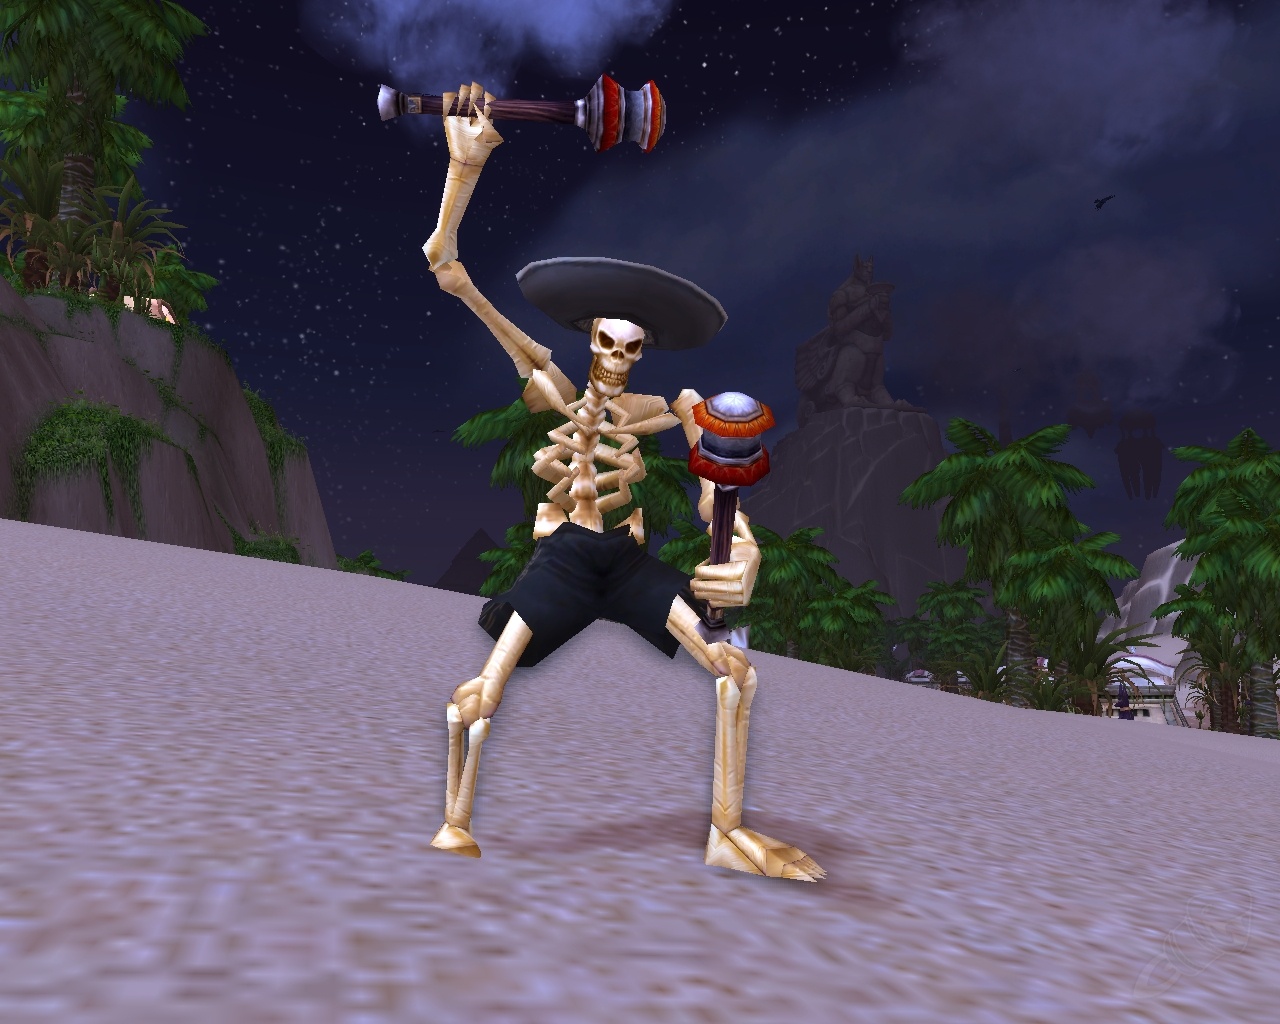 pre-BfA Macabre marionette, hat and shorts in the right place.